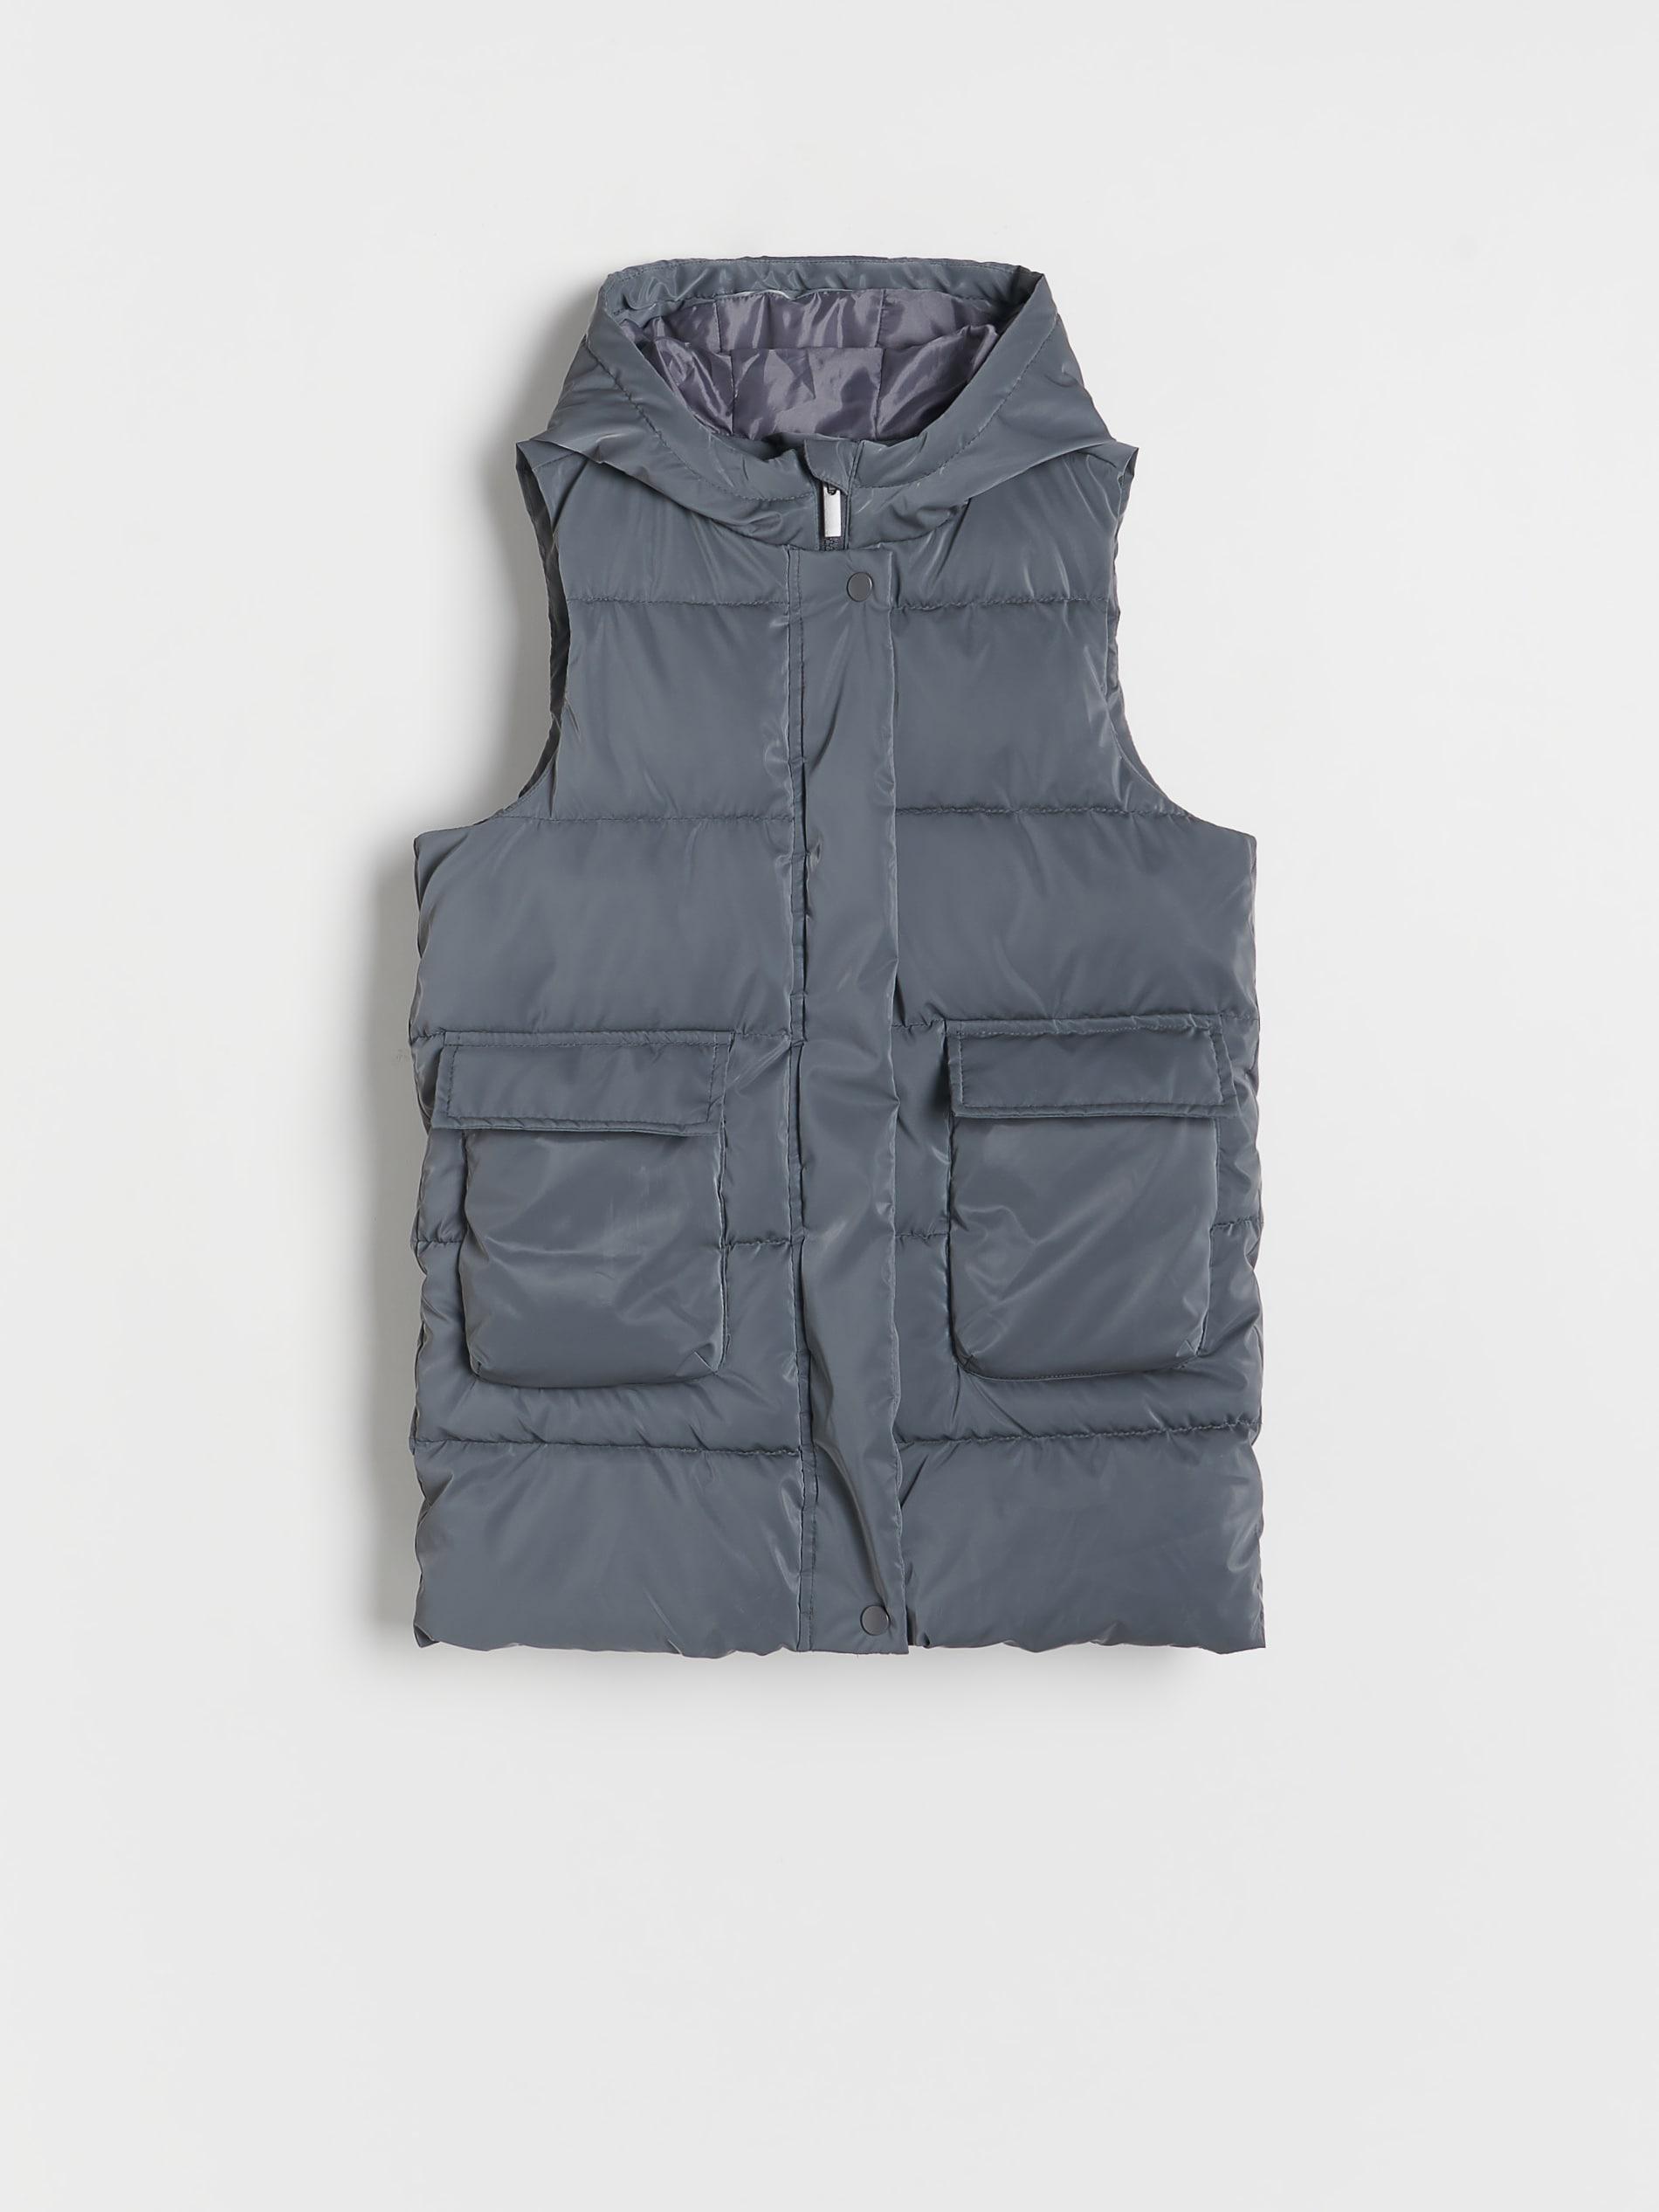 Reserved - Grey Quilted Hooded Vest, Kids Girls